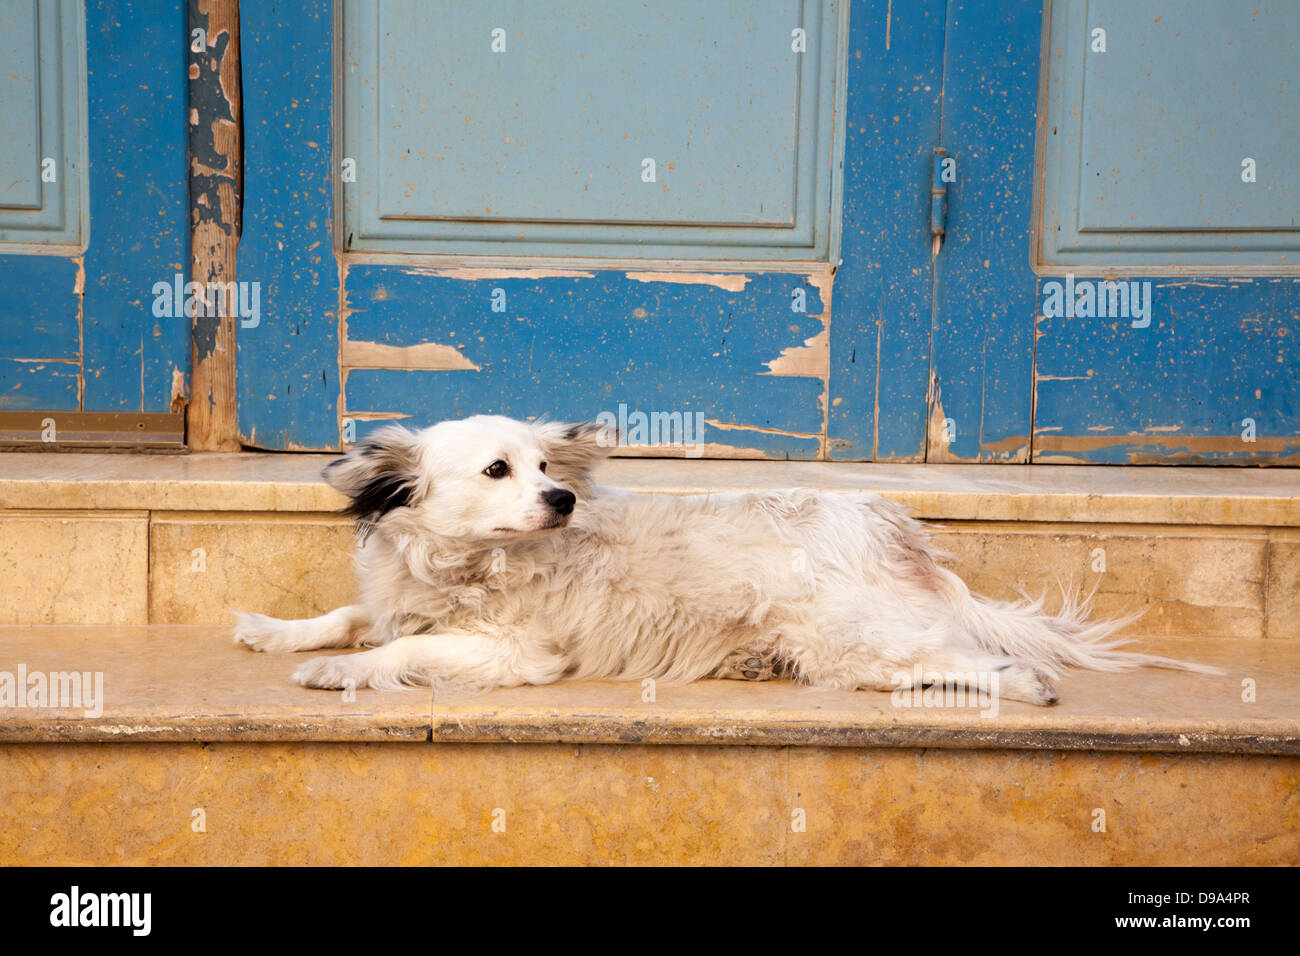 Cute white pet dog lying on the threshold of a home in old town Chania Stock Photo